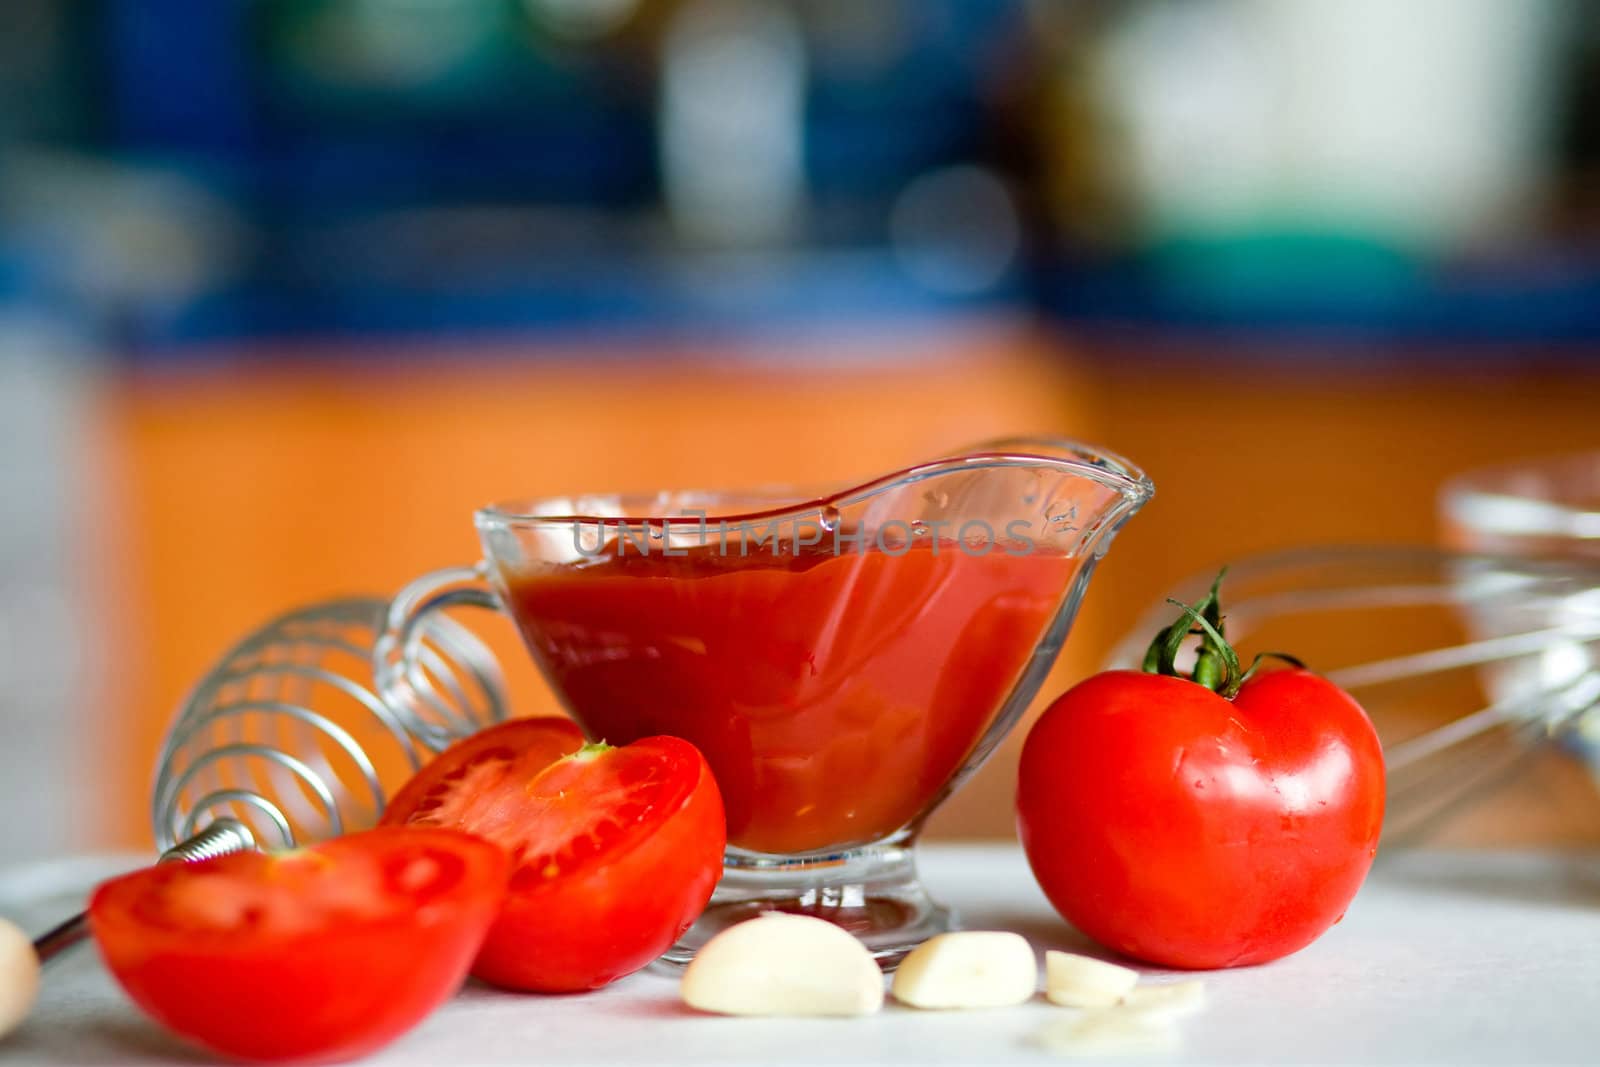 Appetizing  tomatoes and garlic while preparing a poignant sauce

